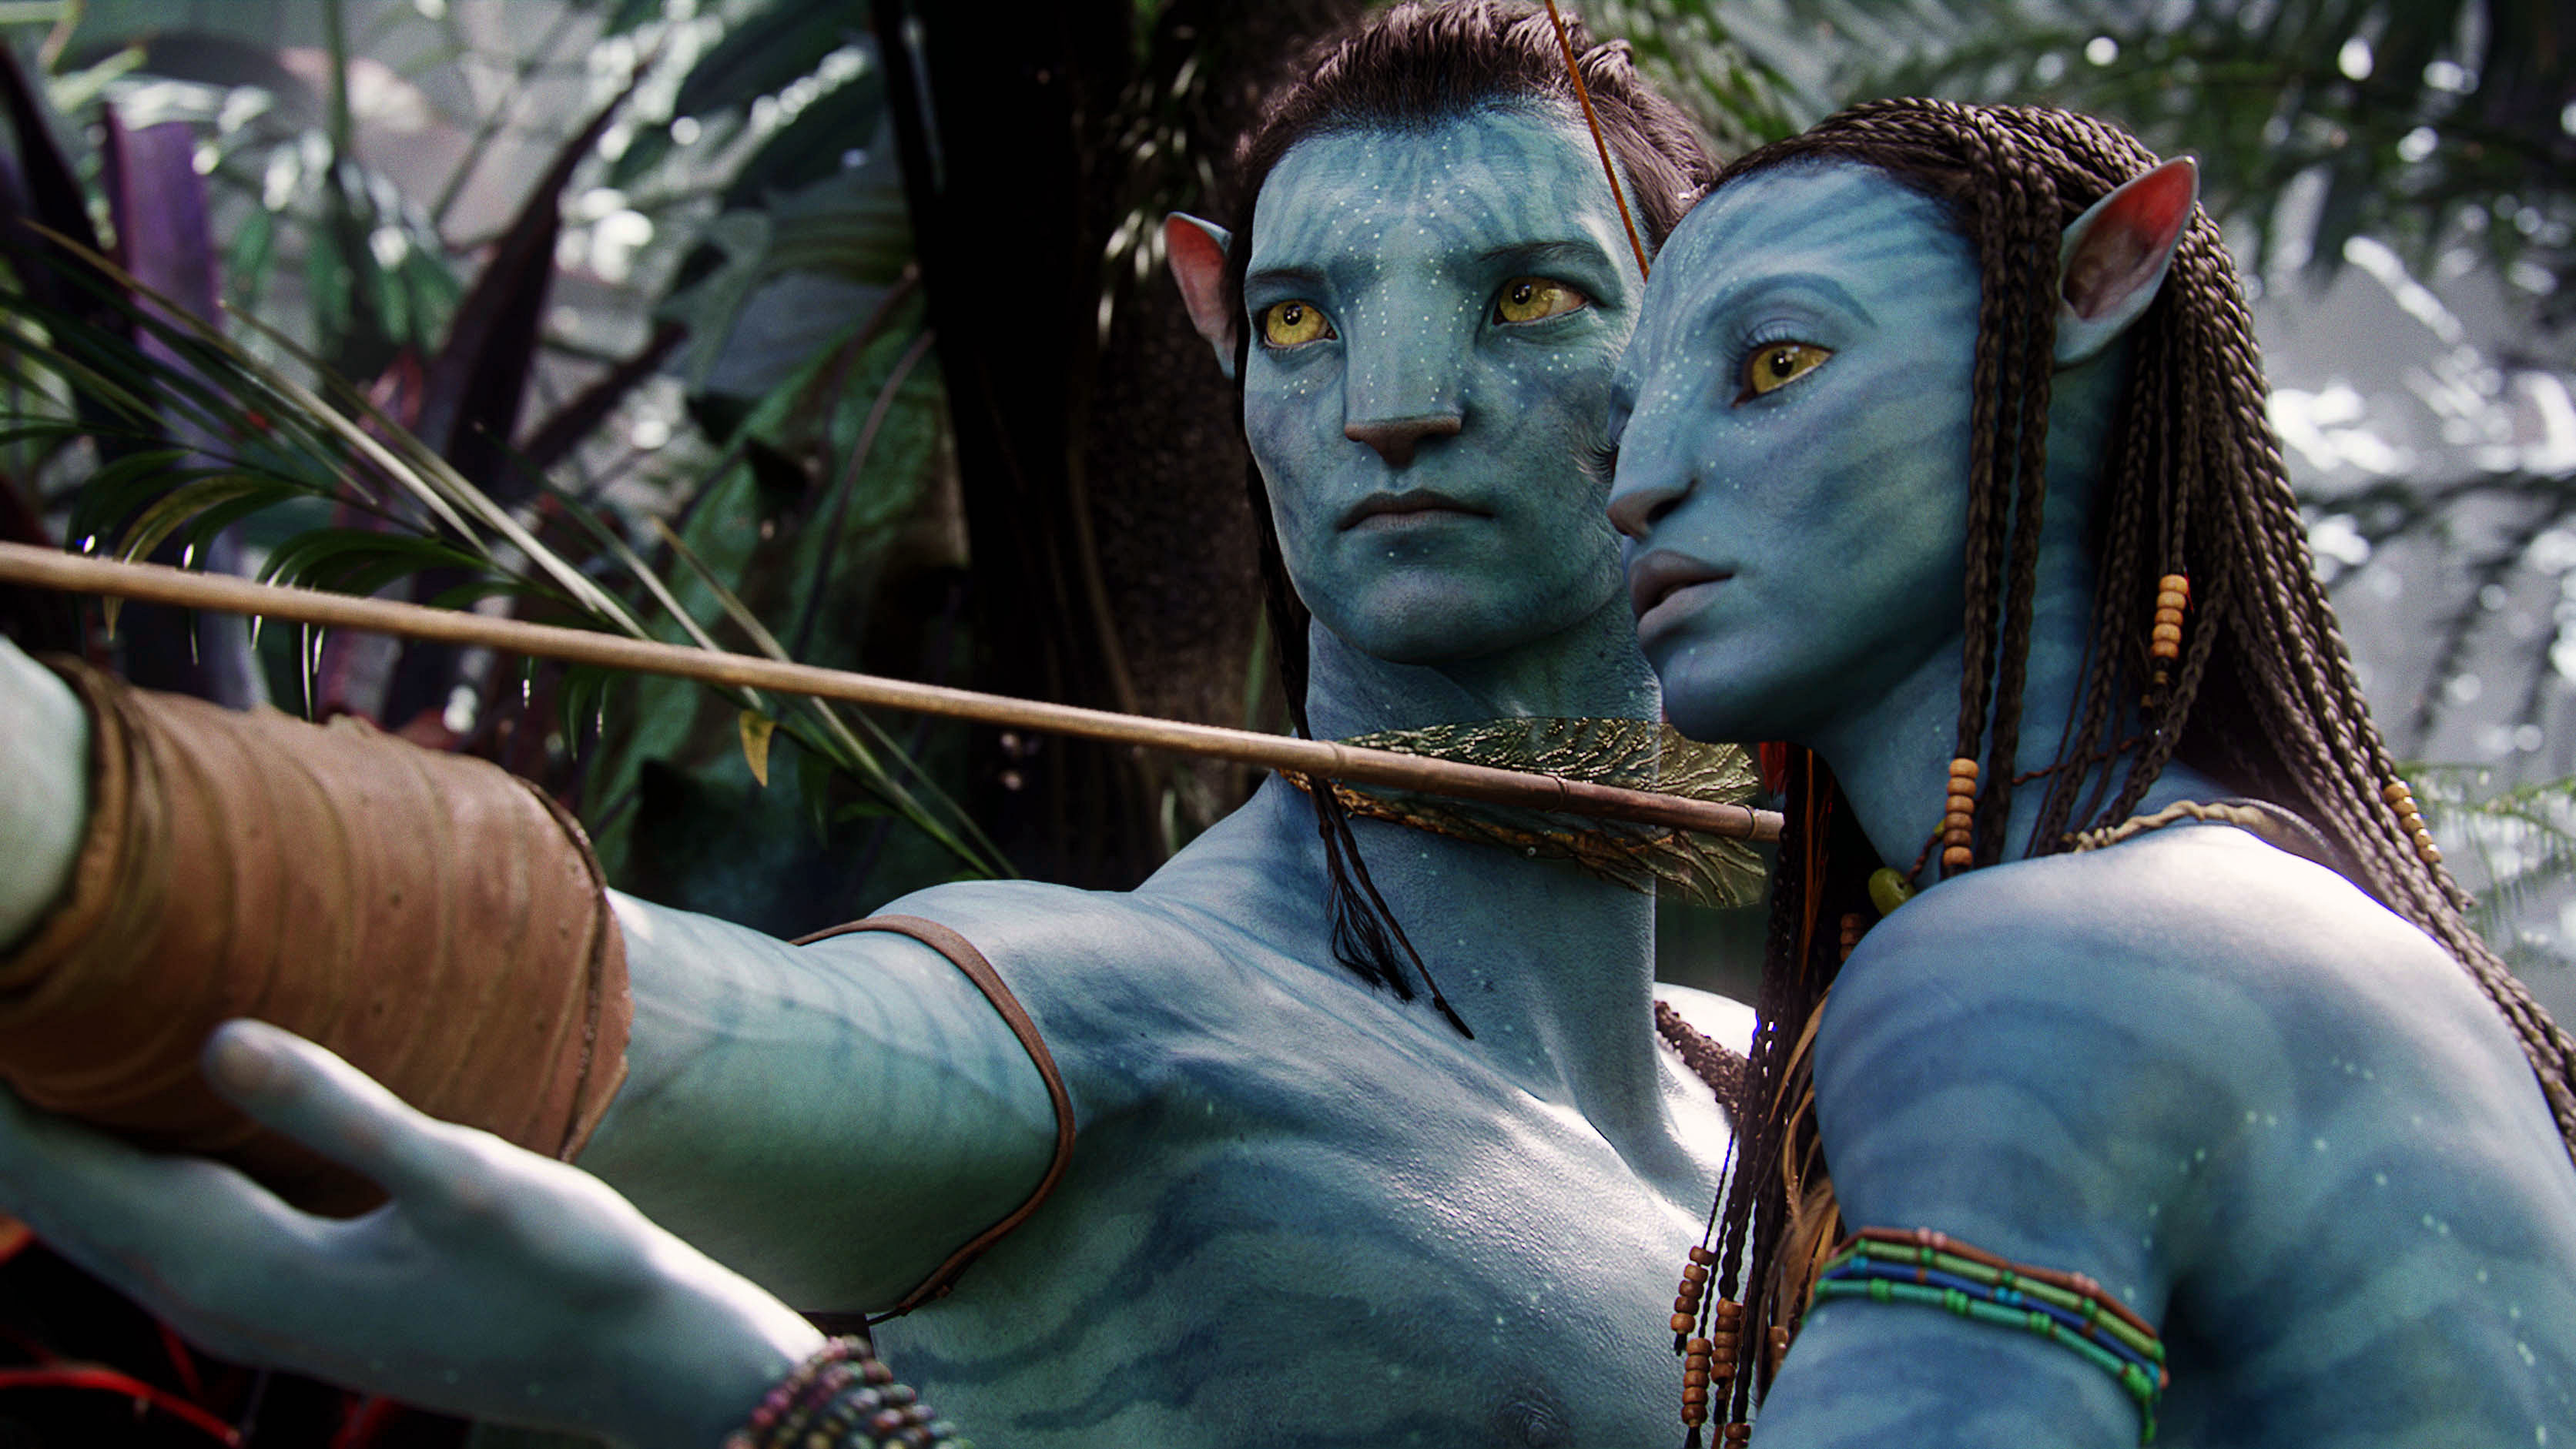 Two characters, Jake Sully and Neytiri from &quot;Avatar,&quot; holding a bow together